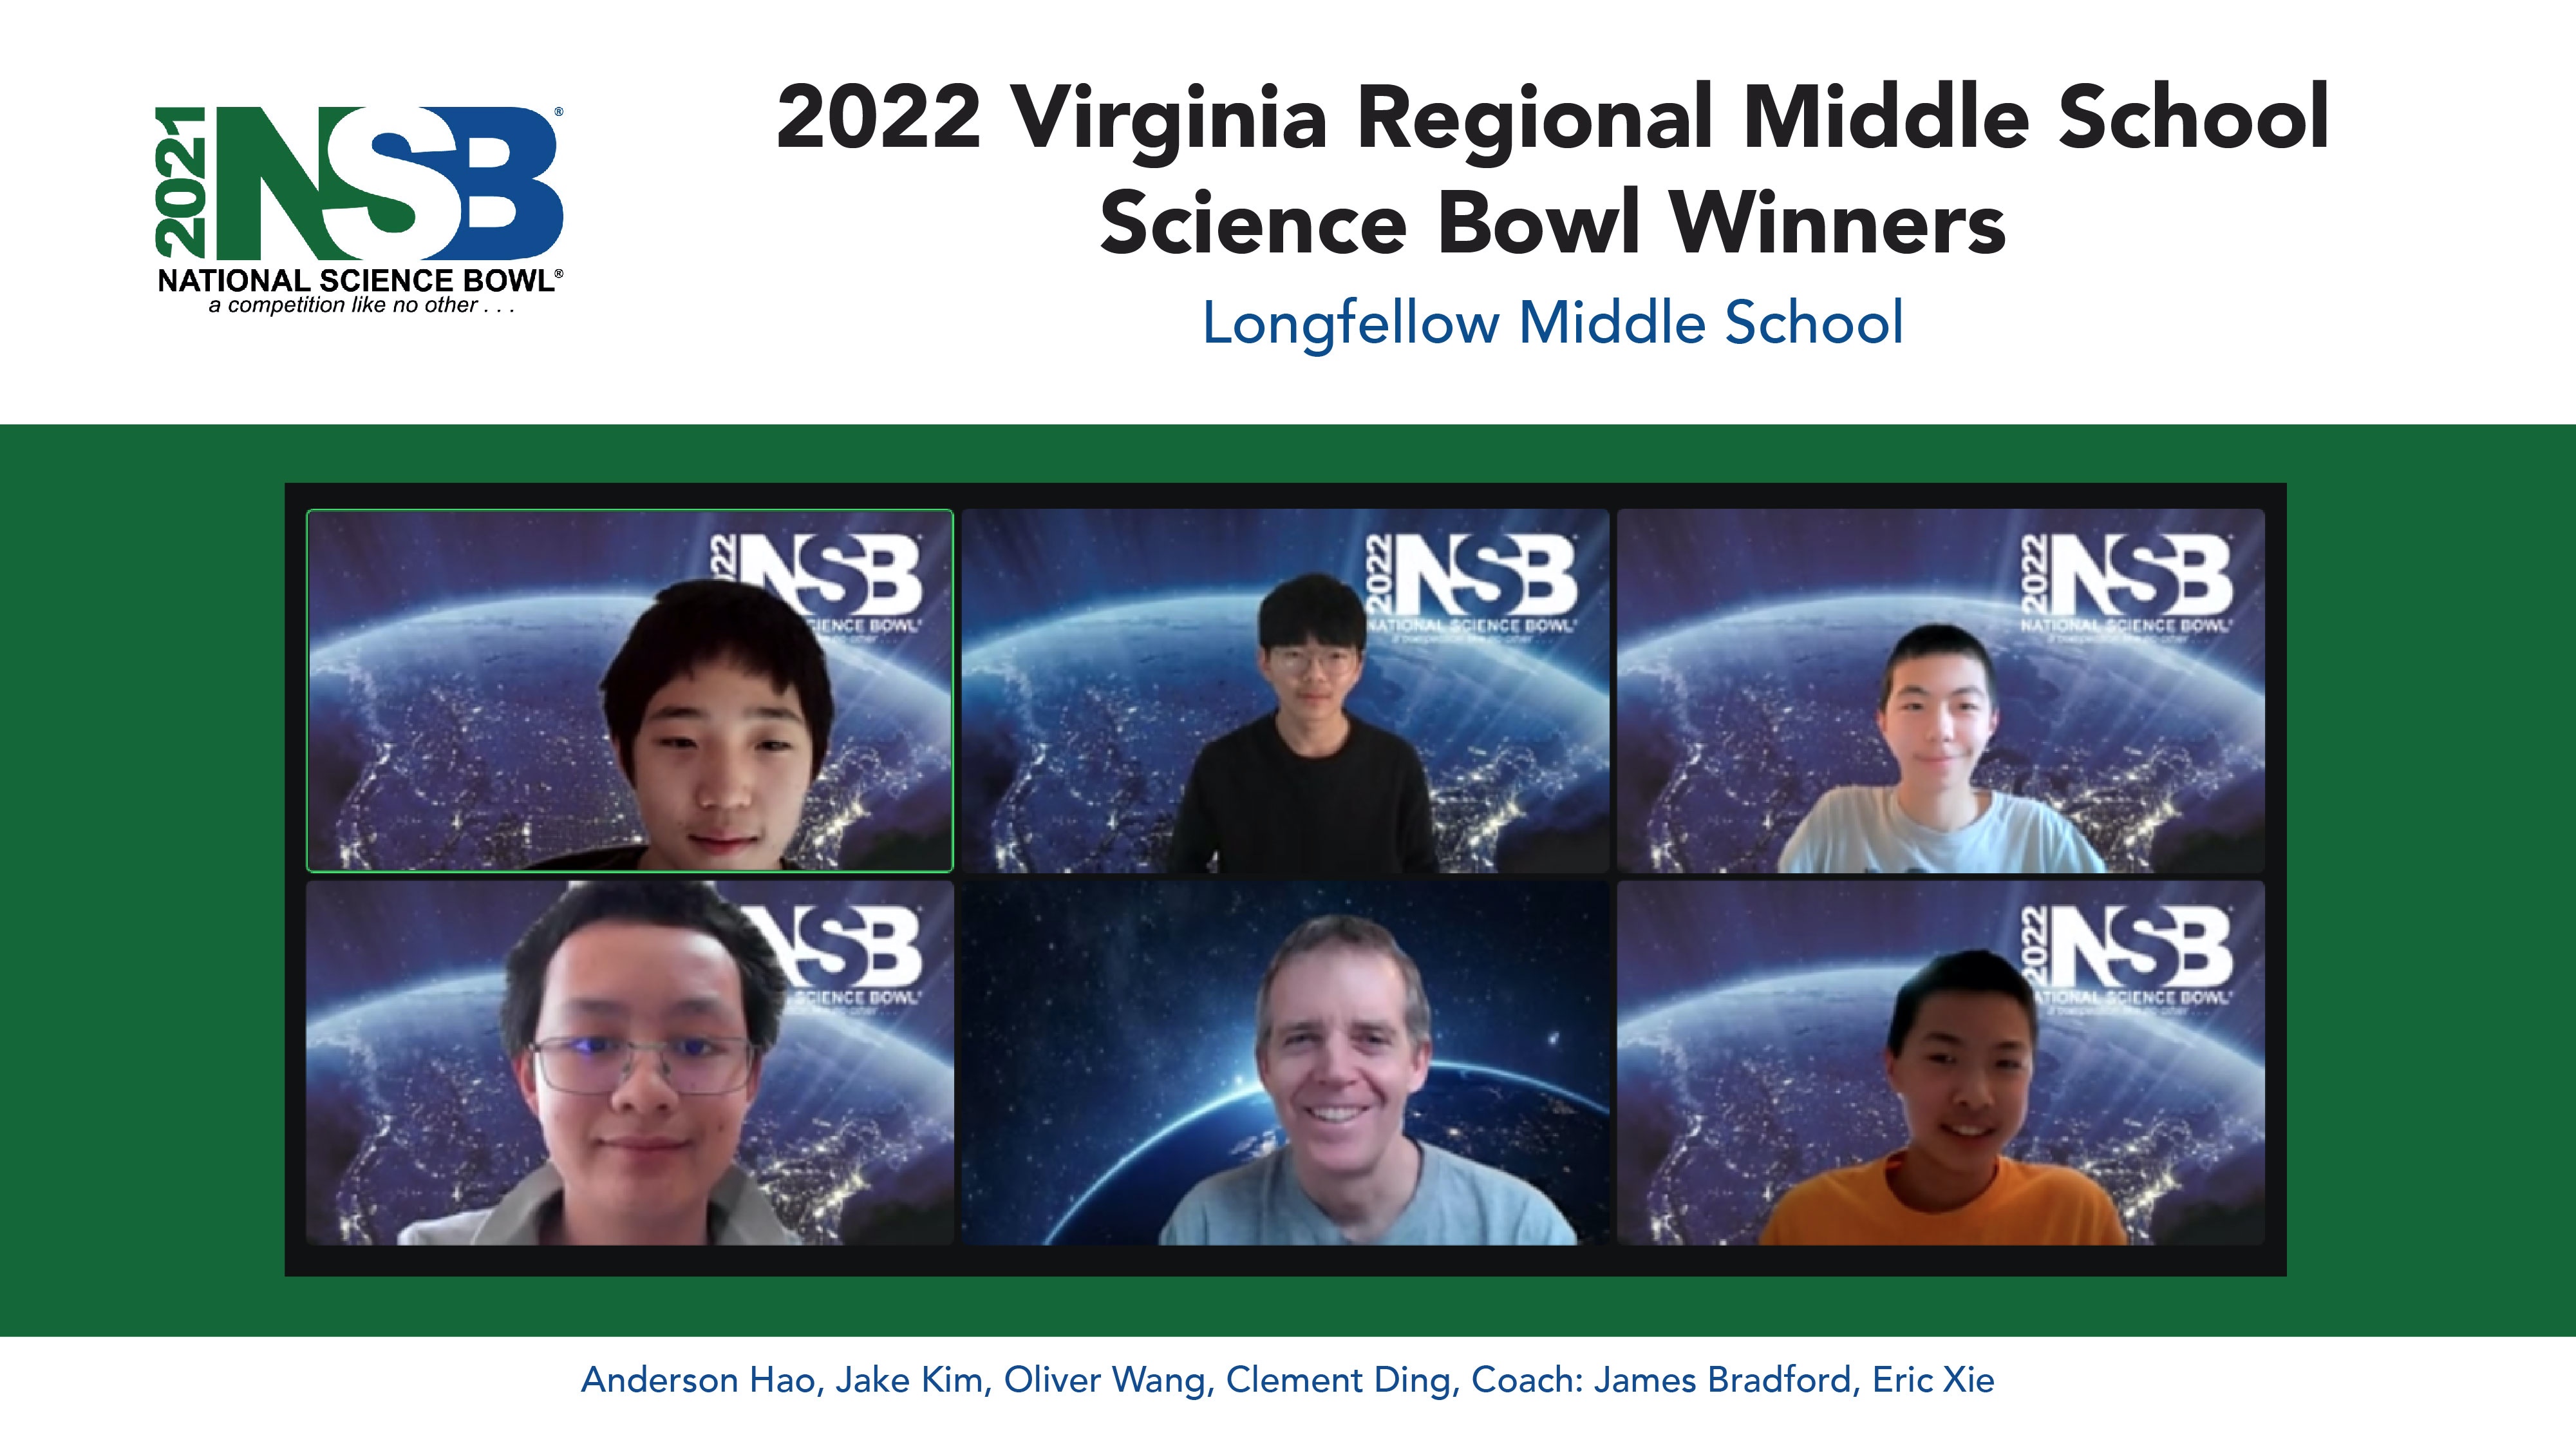 2022 Middle School Science Bowl Winners: Virginia Regional Competition